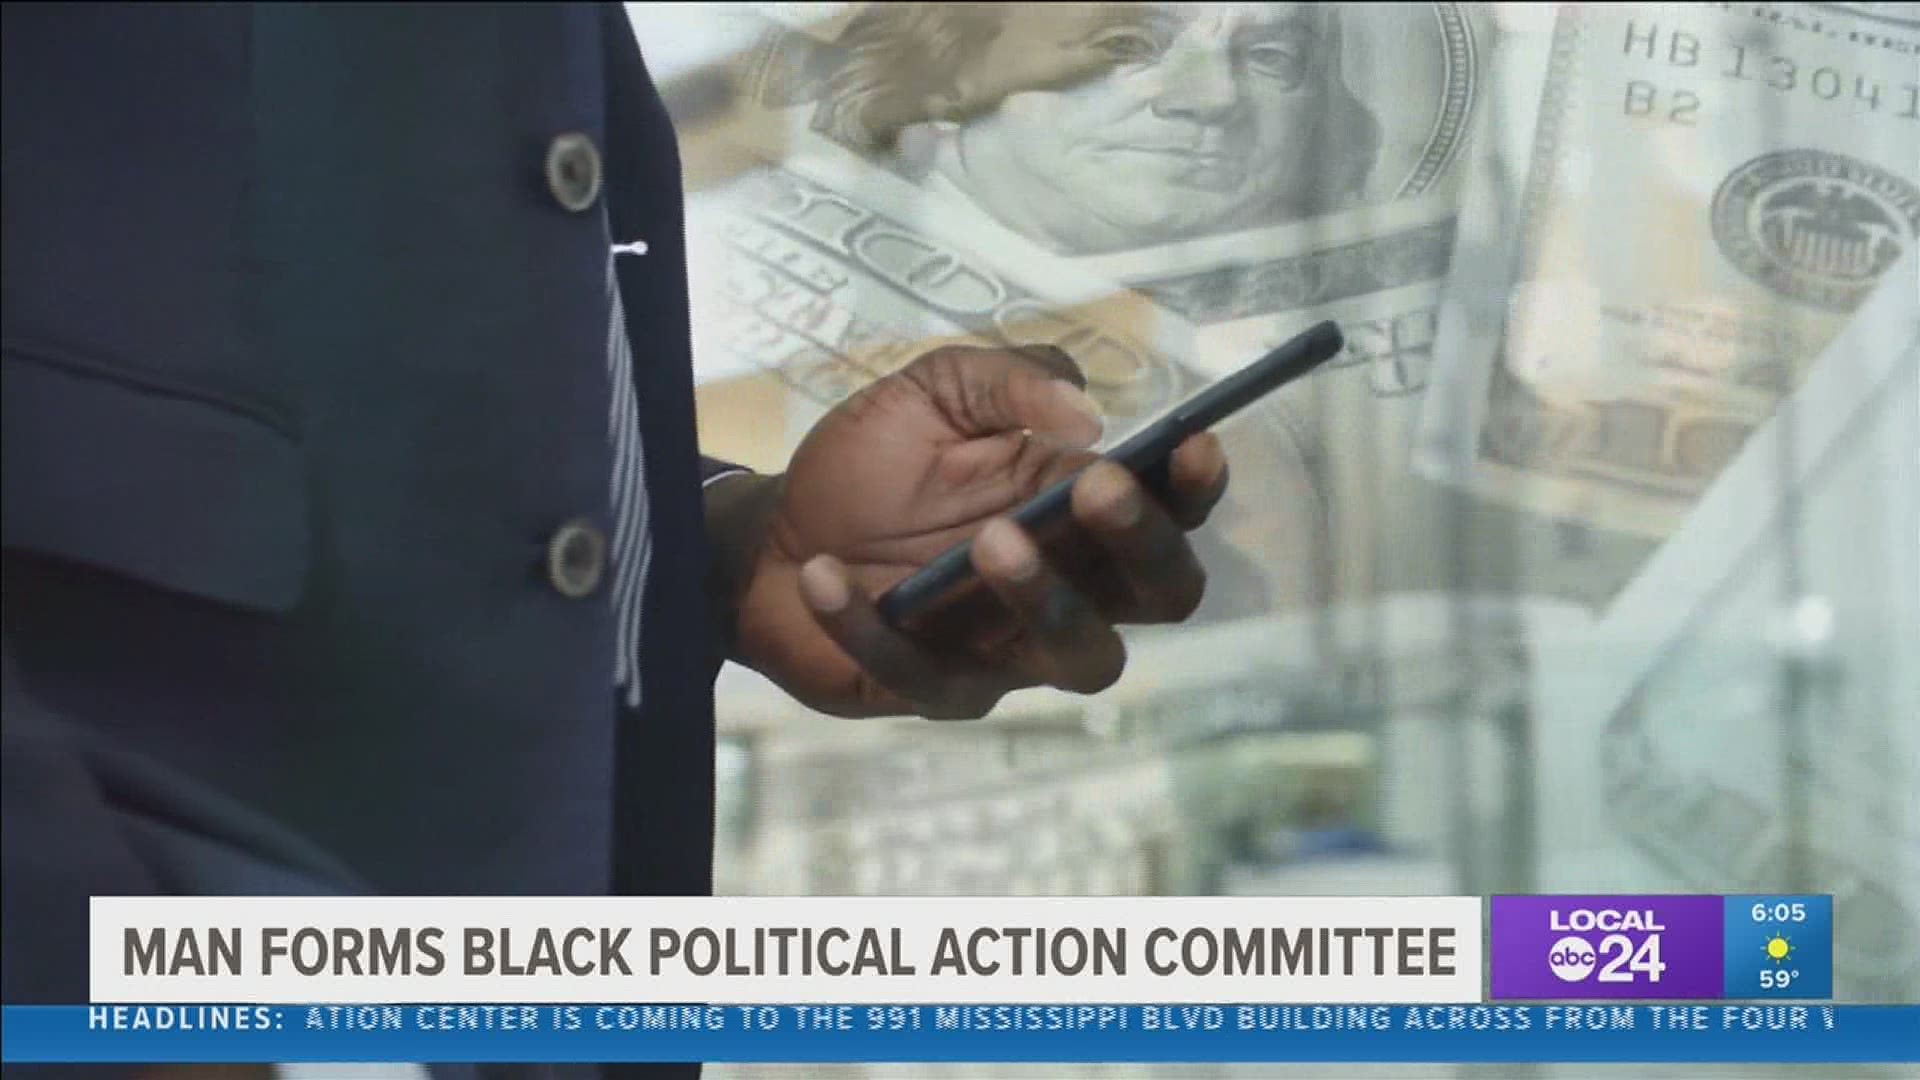 "I'm going to tell white people we don't want your money - not a dime," said Ricky Wilkins.